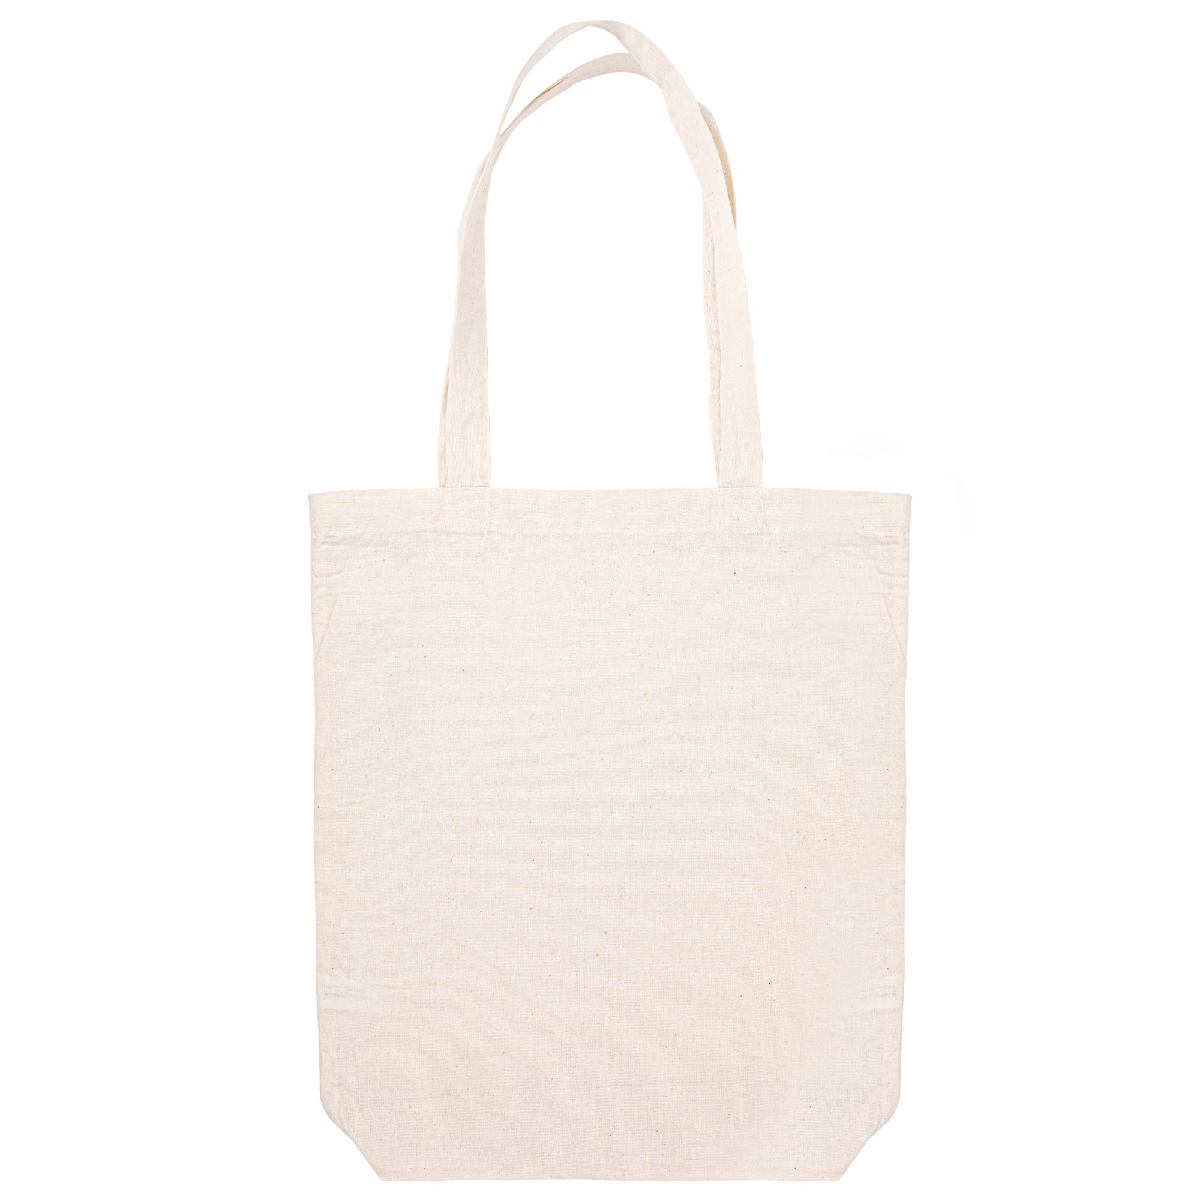 Natural 14”x17” Cotton Tote Bag with Gusset